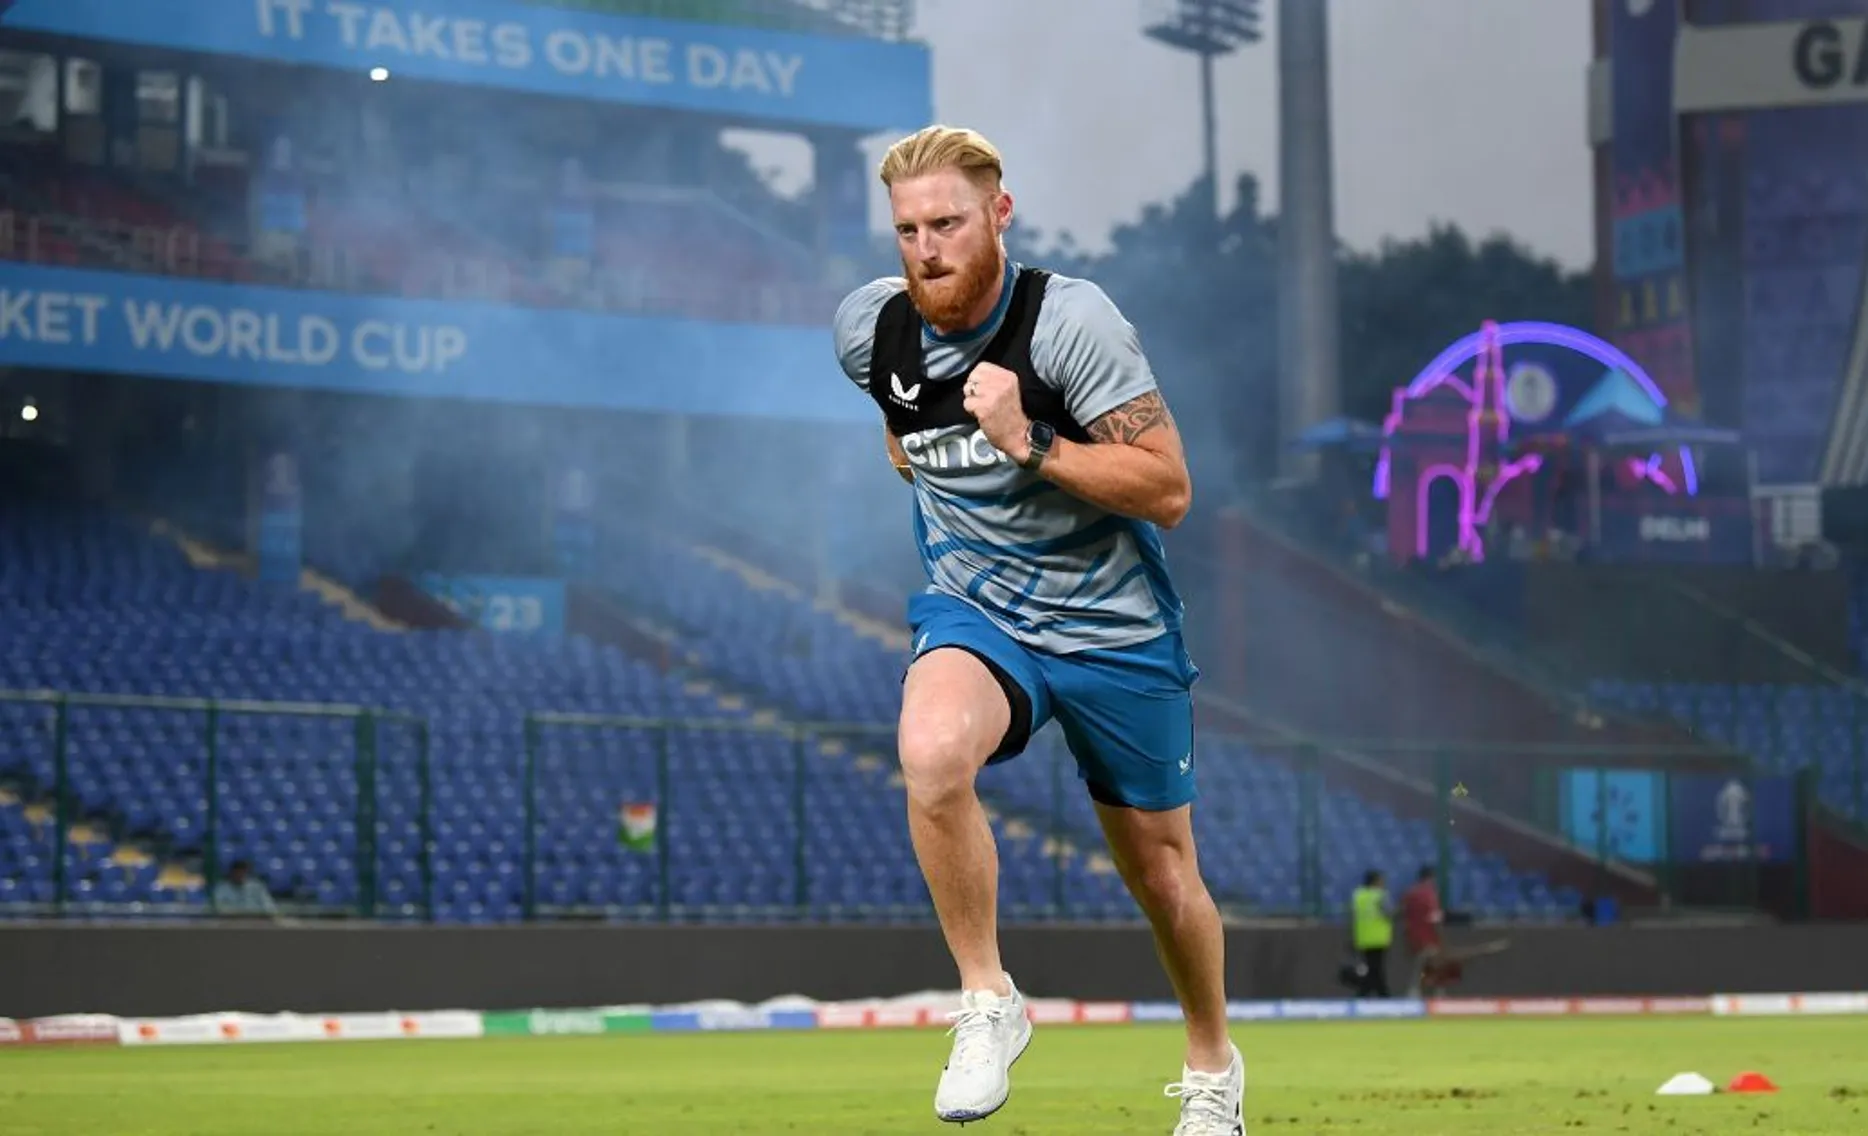 Ben Stokes opts out of upcoming T20 World Cup